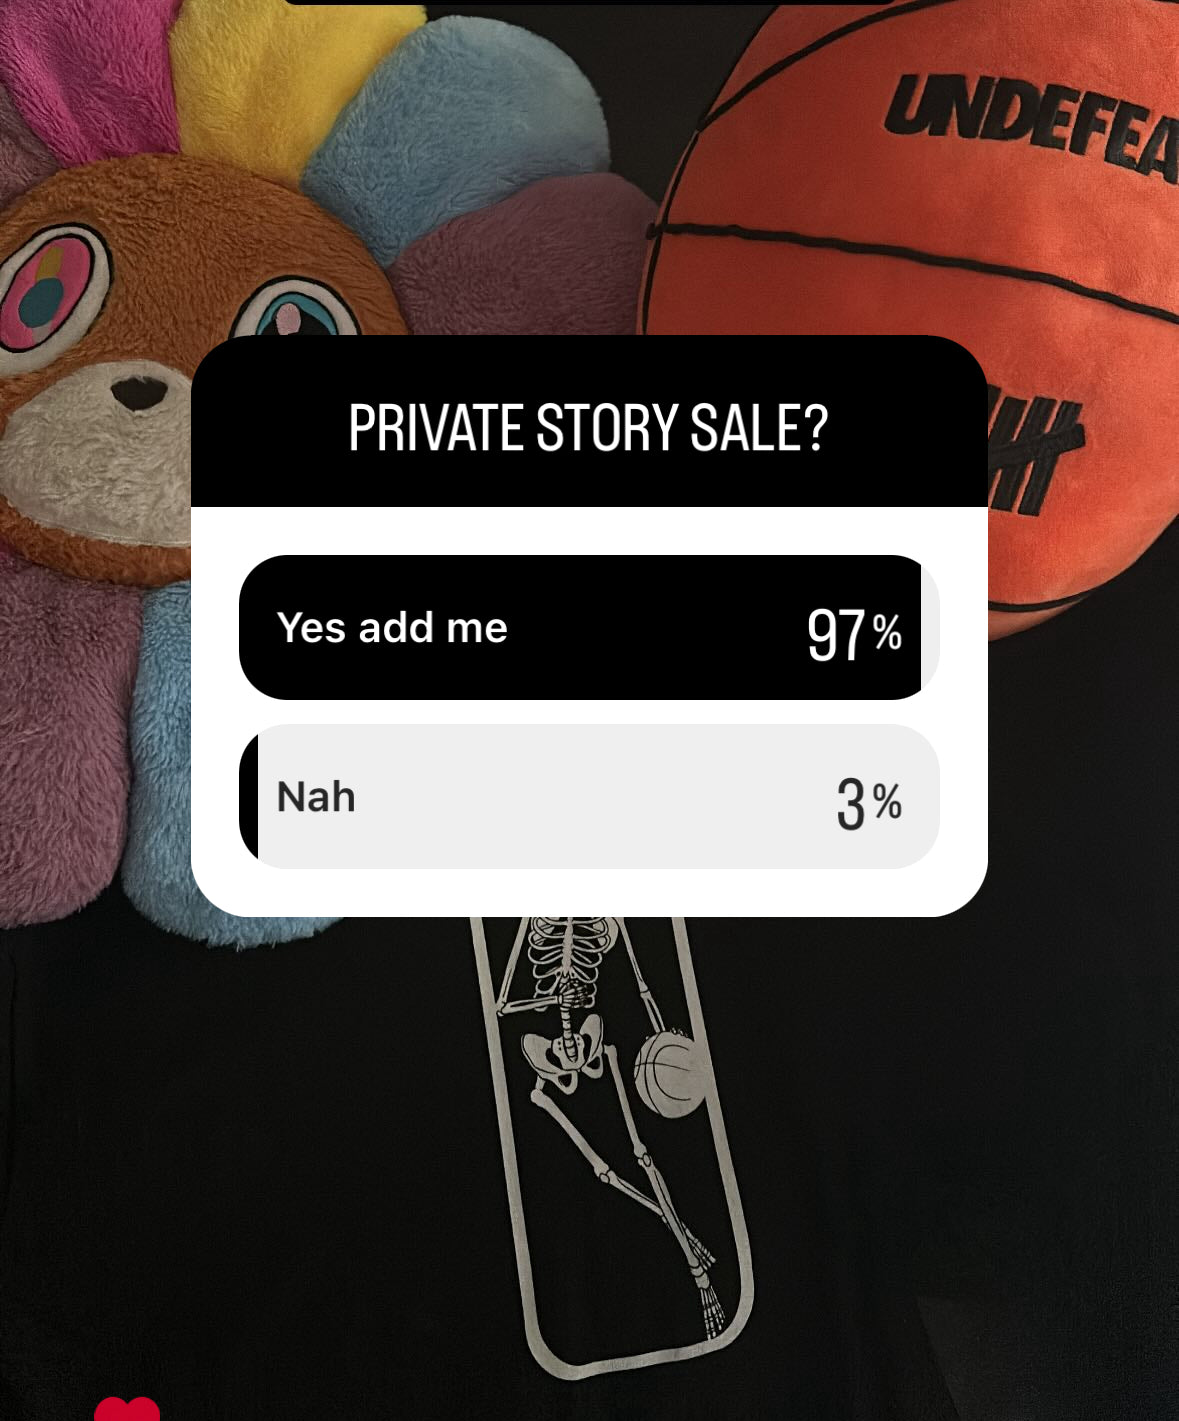 Private story sale purchase